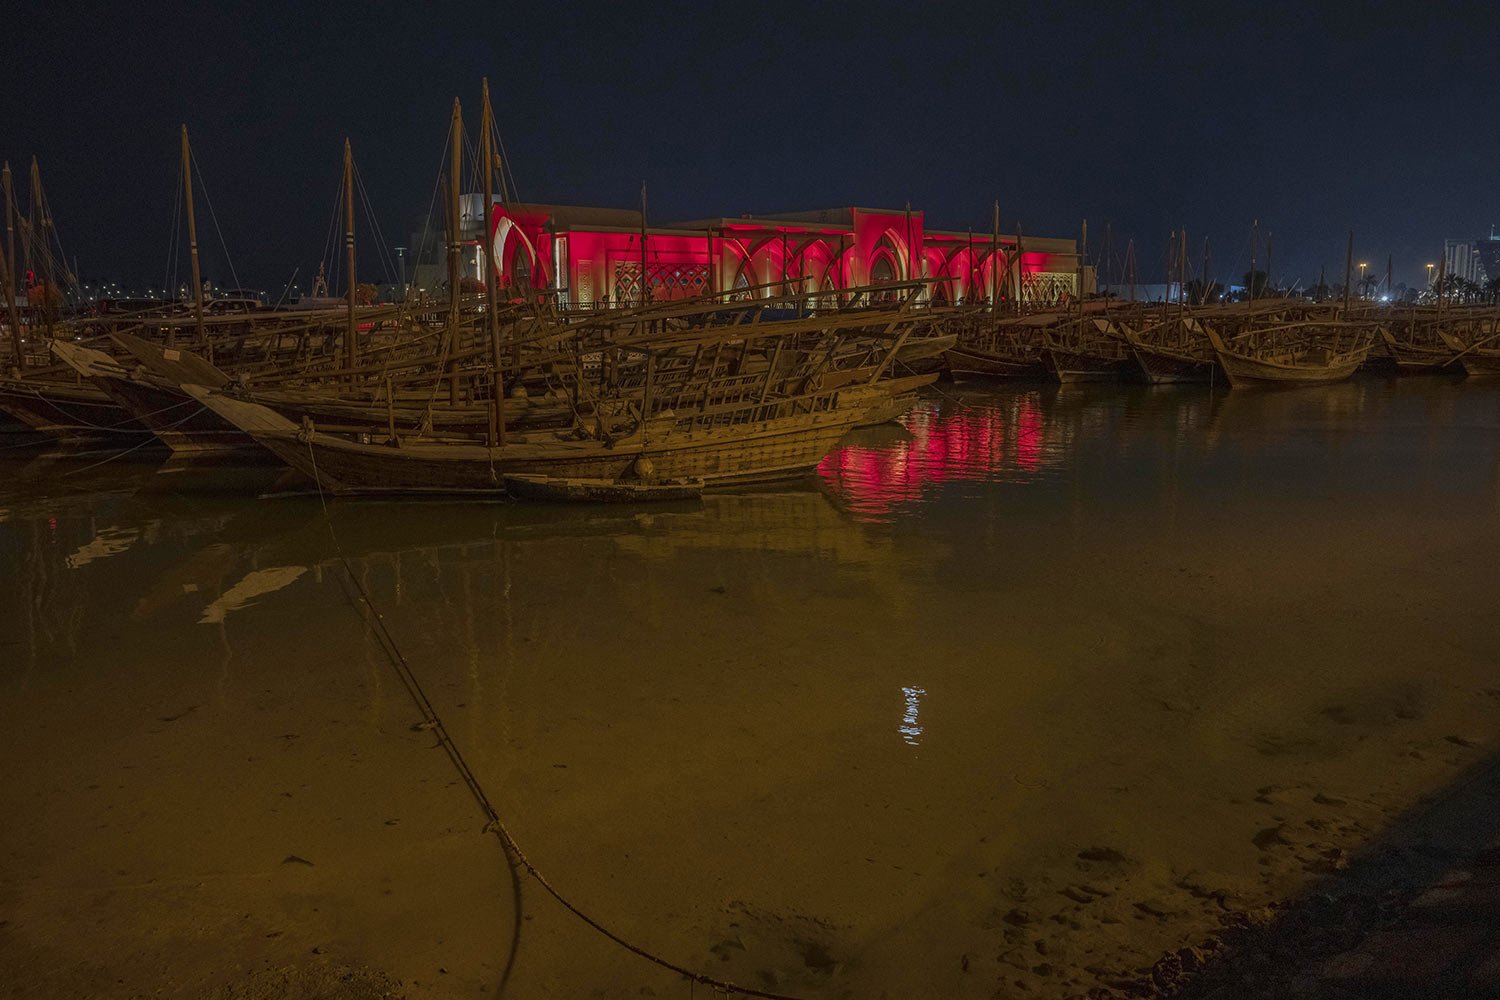  Traditional wooden boats are docked on the corniche in Doha, Qatar, Friday, Oct. 14, 2022. (AP Photo/Nariman El-Mofty) 